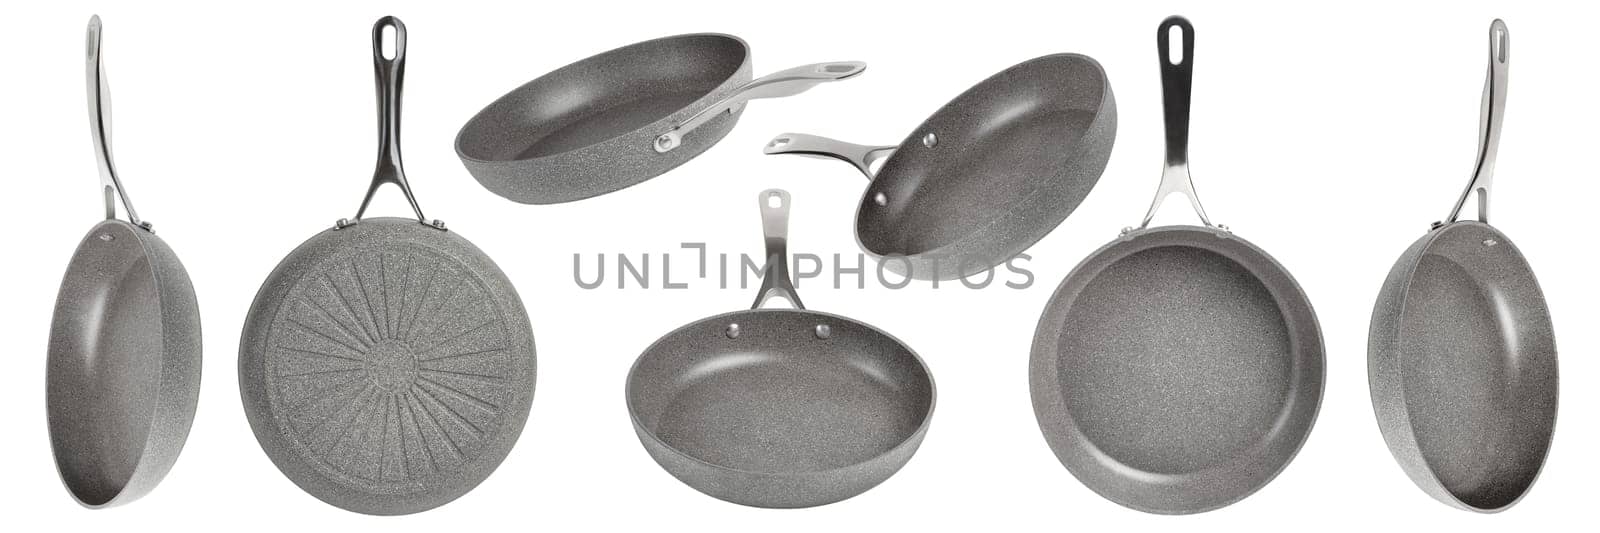 Big set of frying pans with non-stick coating on a white isolated background. New gray frying pans, clipart for inserting into a design or project. Overlay for kitchen theme. Different angle by SERSOL